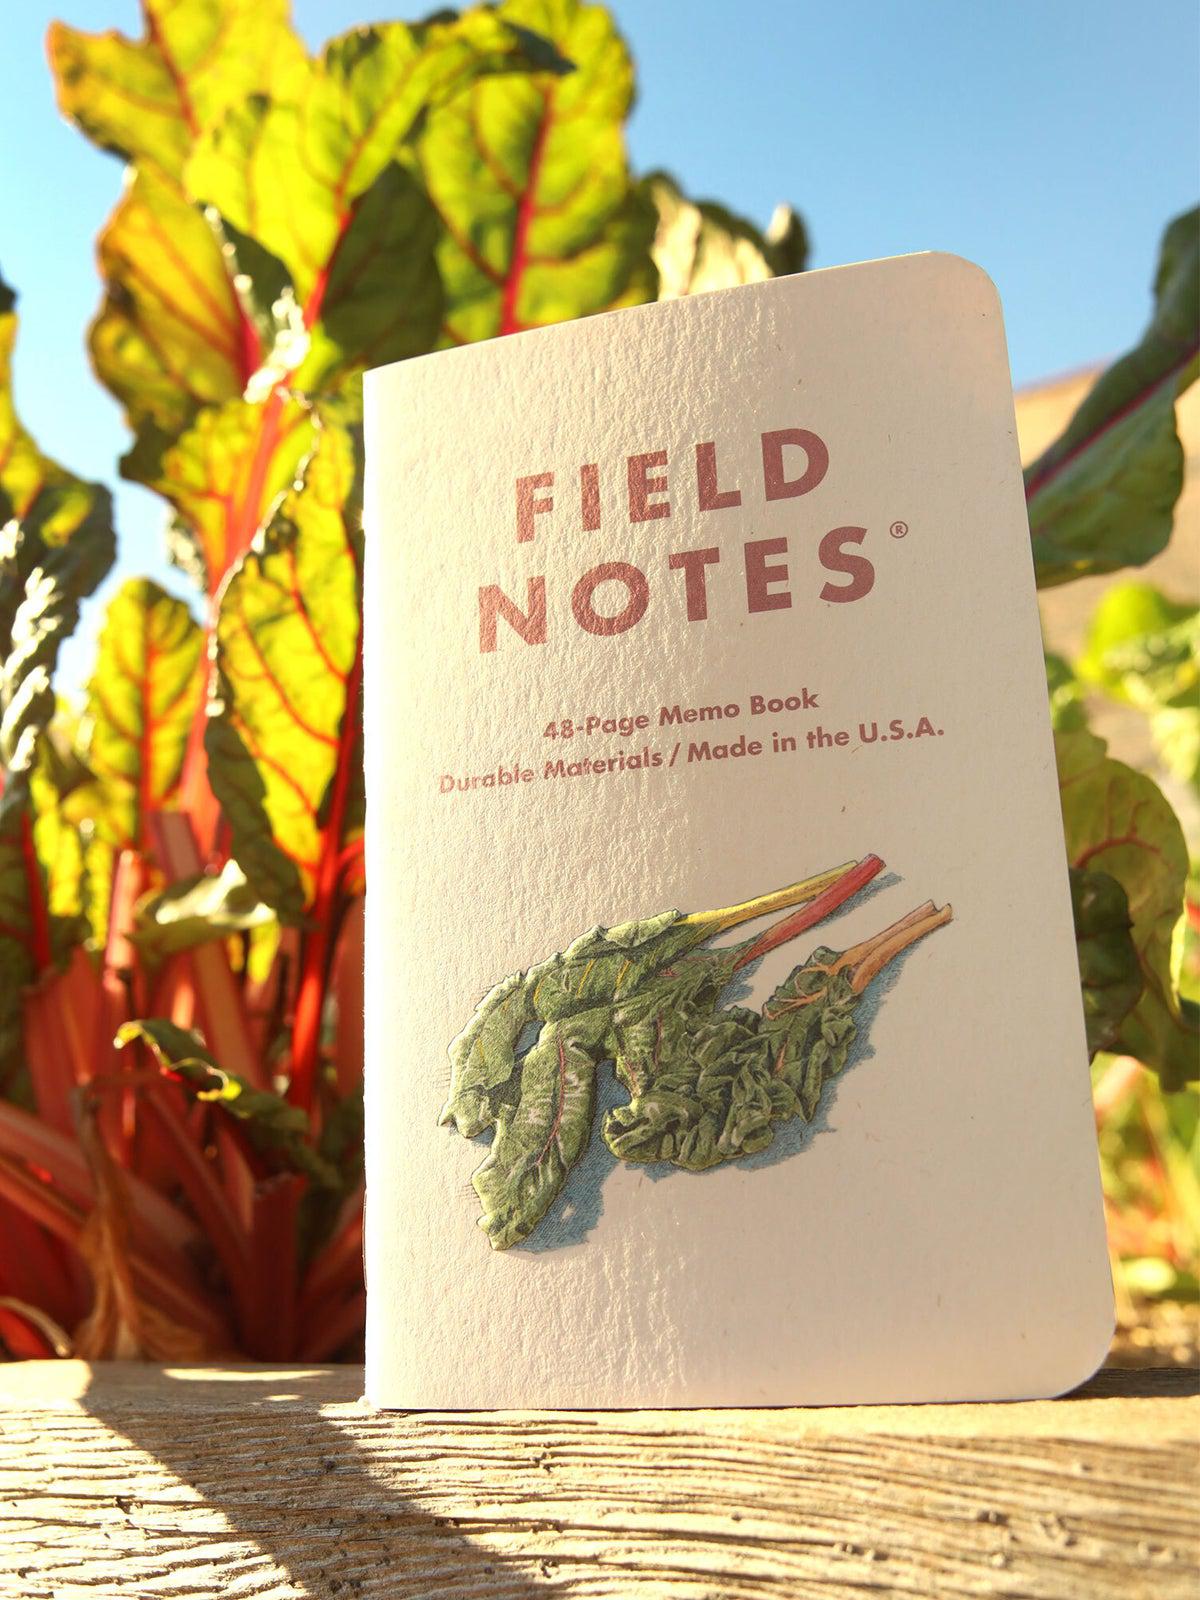 Field Notes Ignition Harvest 3 Pack Perforated Ruled Dot Ledger